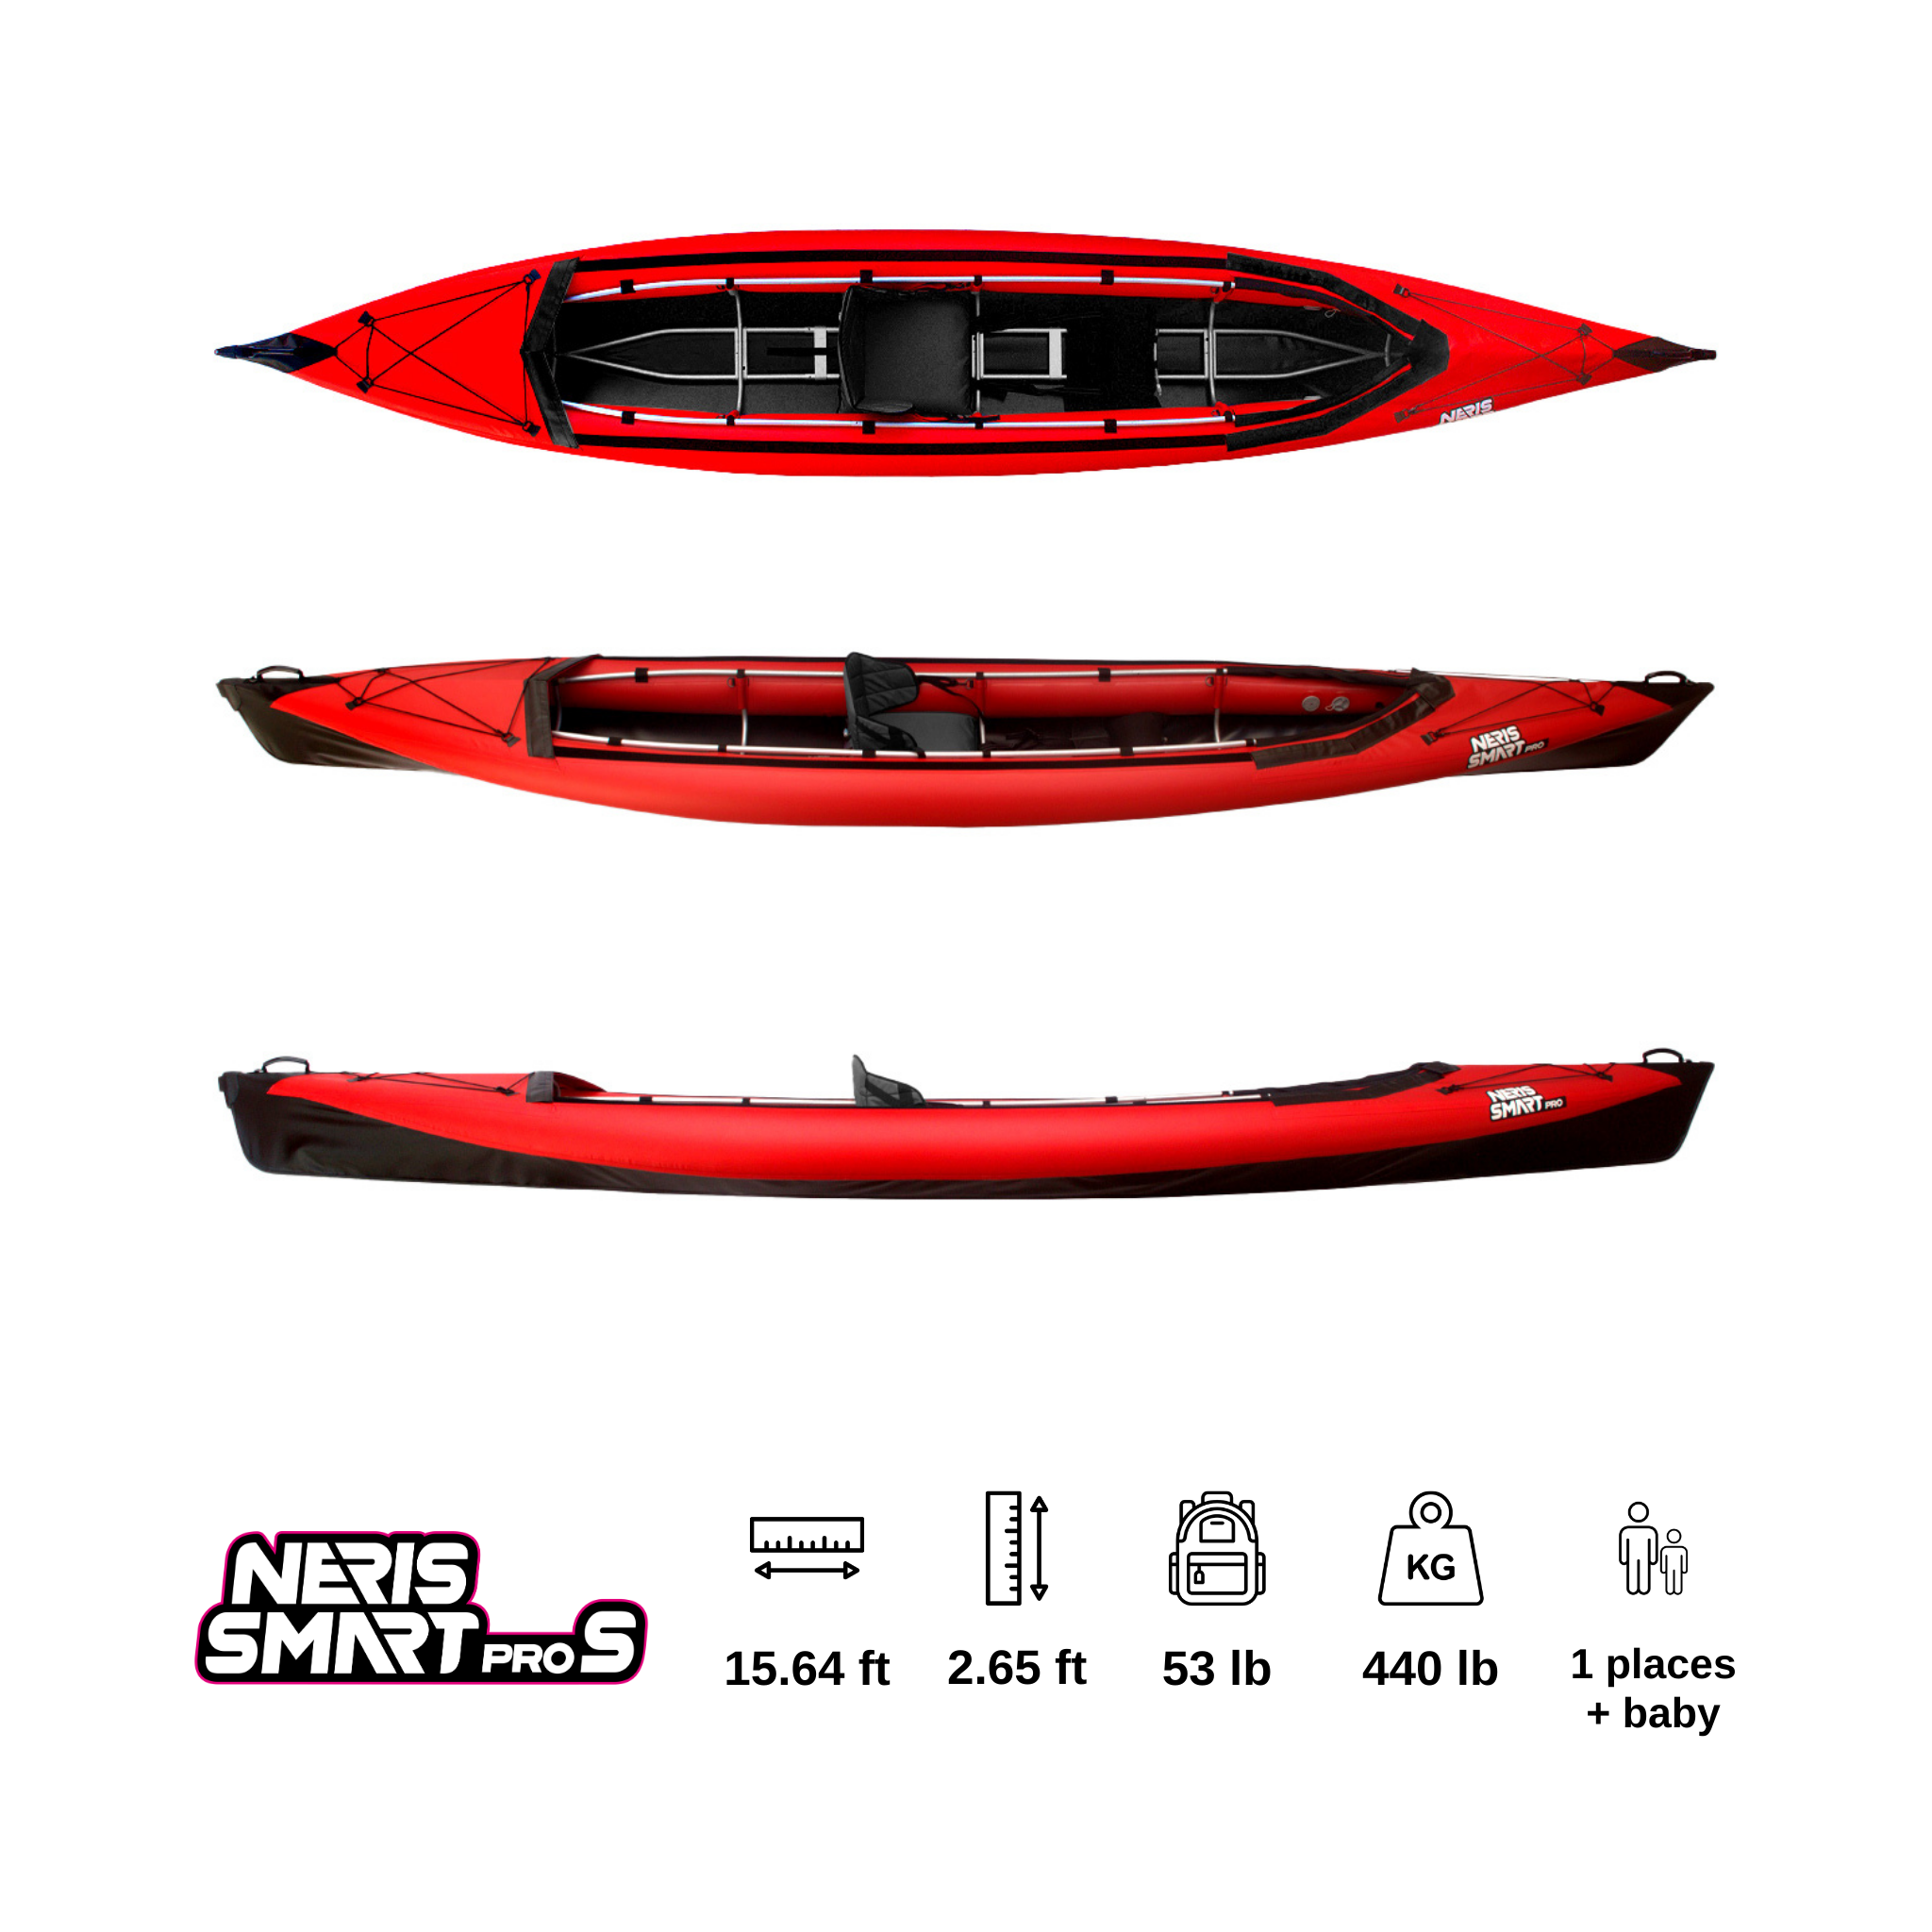 A NERIS Smart Pro S folding kayak designed for one person, featuring a sleek red top, merging high performance with solo paddling flexibility